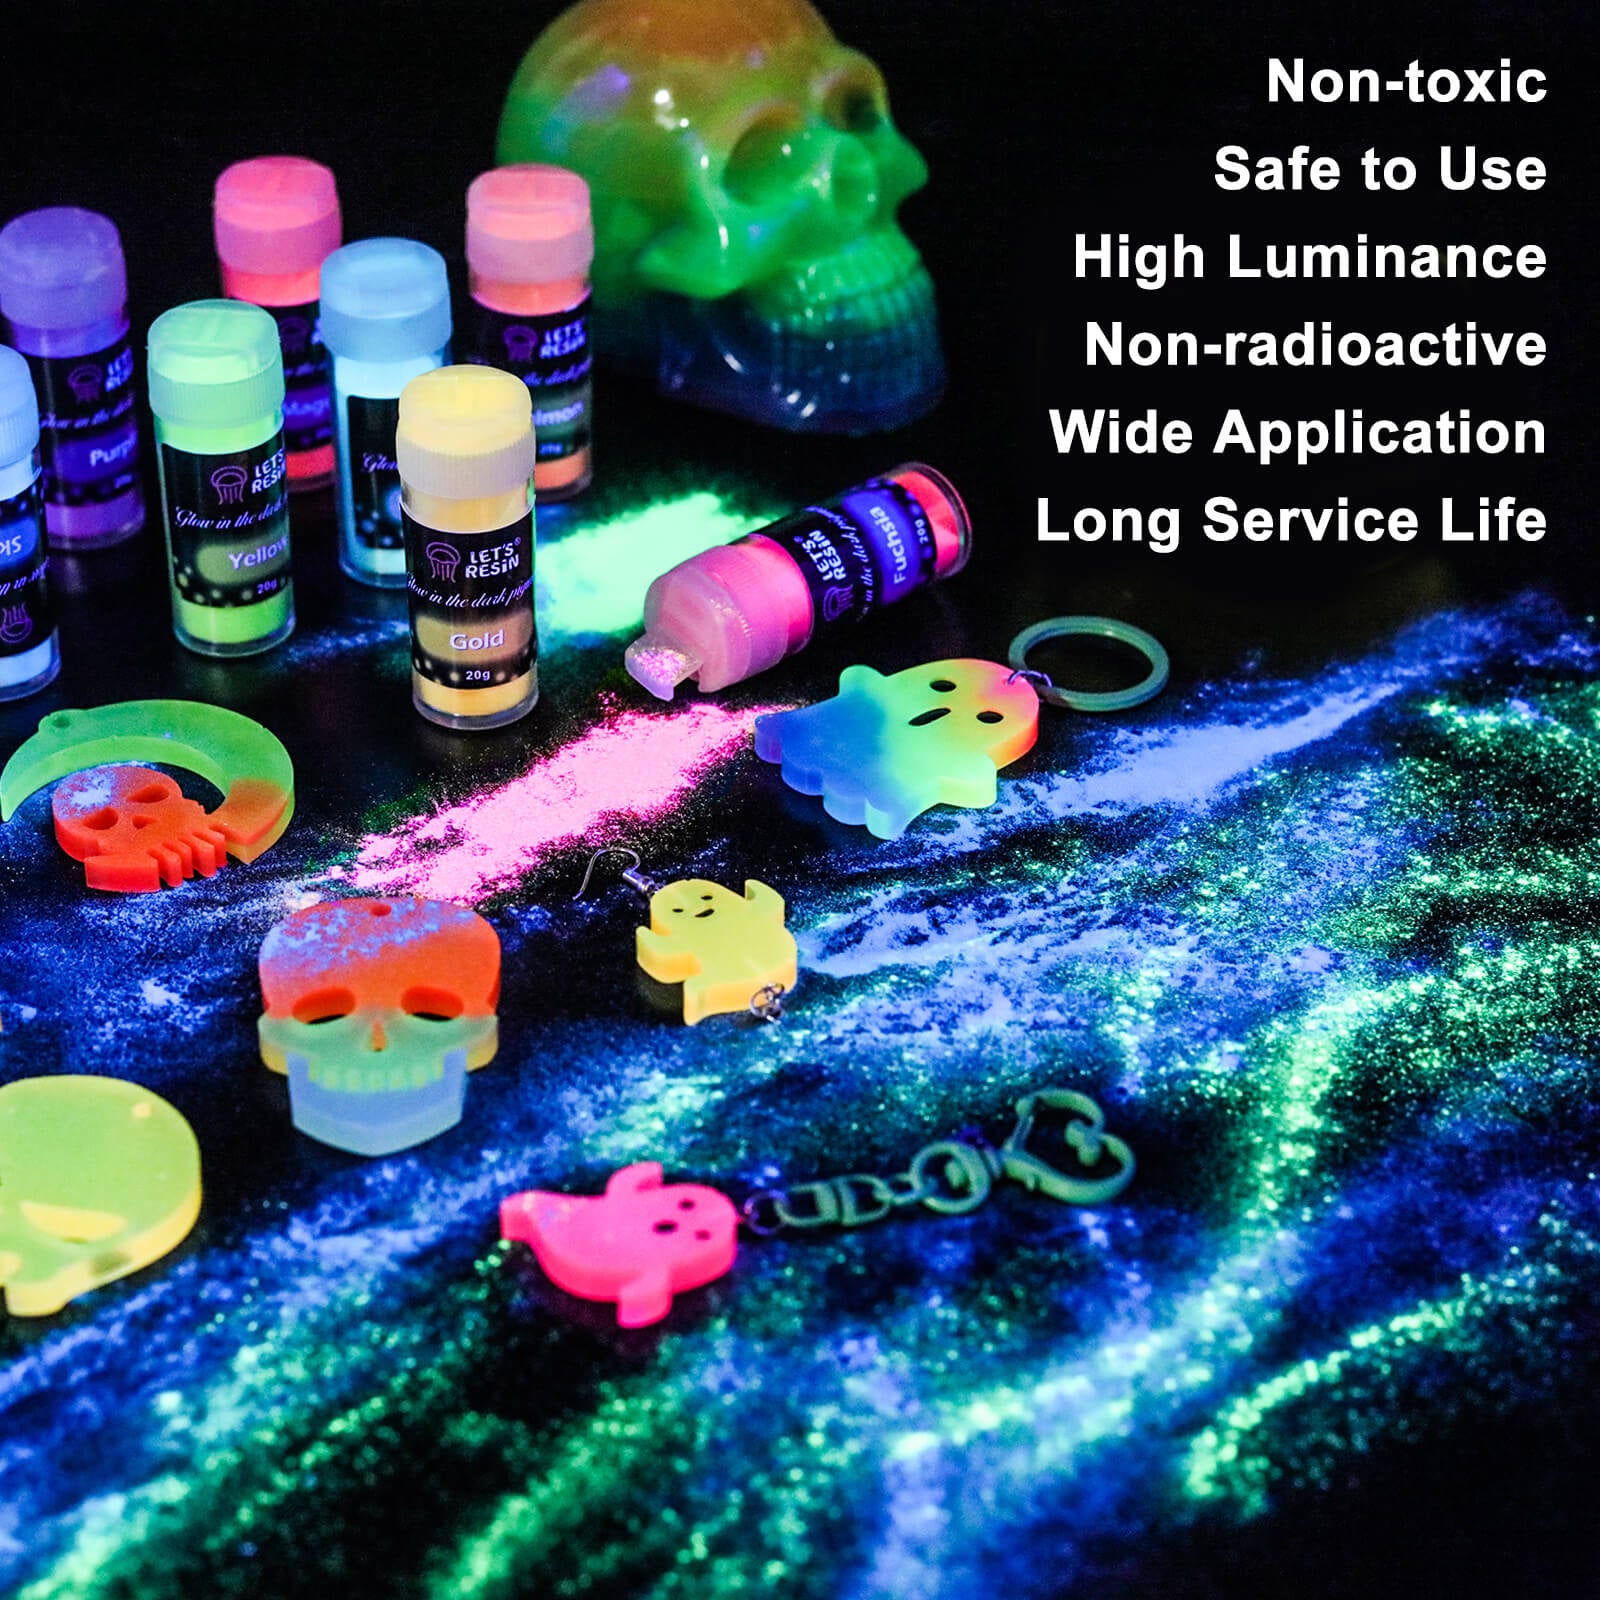 Let's Resin 12 Colors Glow in The Dark Pigment Powder - 20g/0.7oz Each Bottle Epoxy Resin Luminous Pigments for Slime, Nails, Acrylic Paint